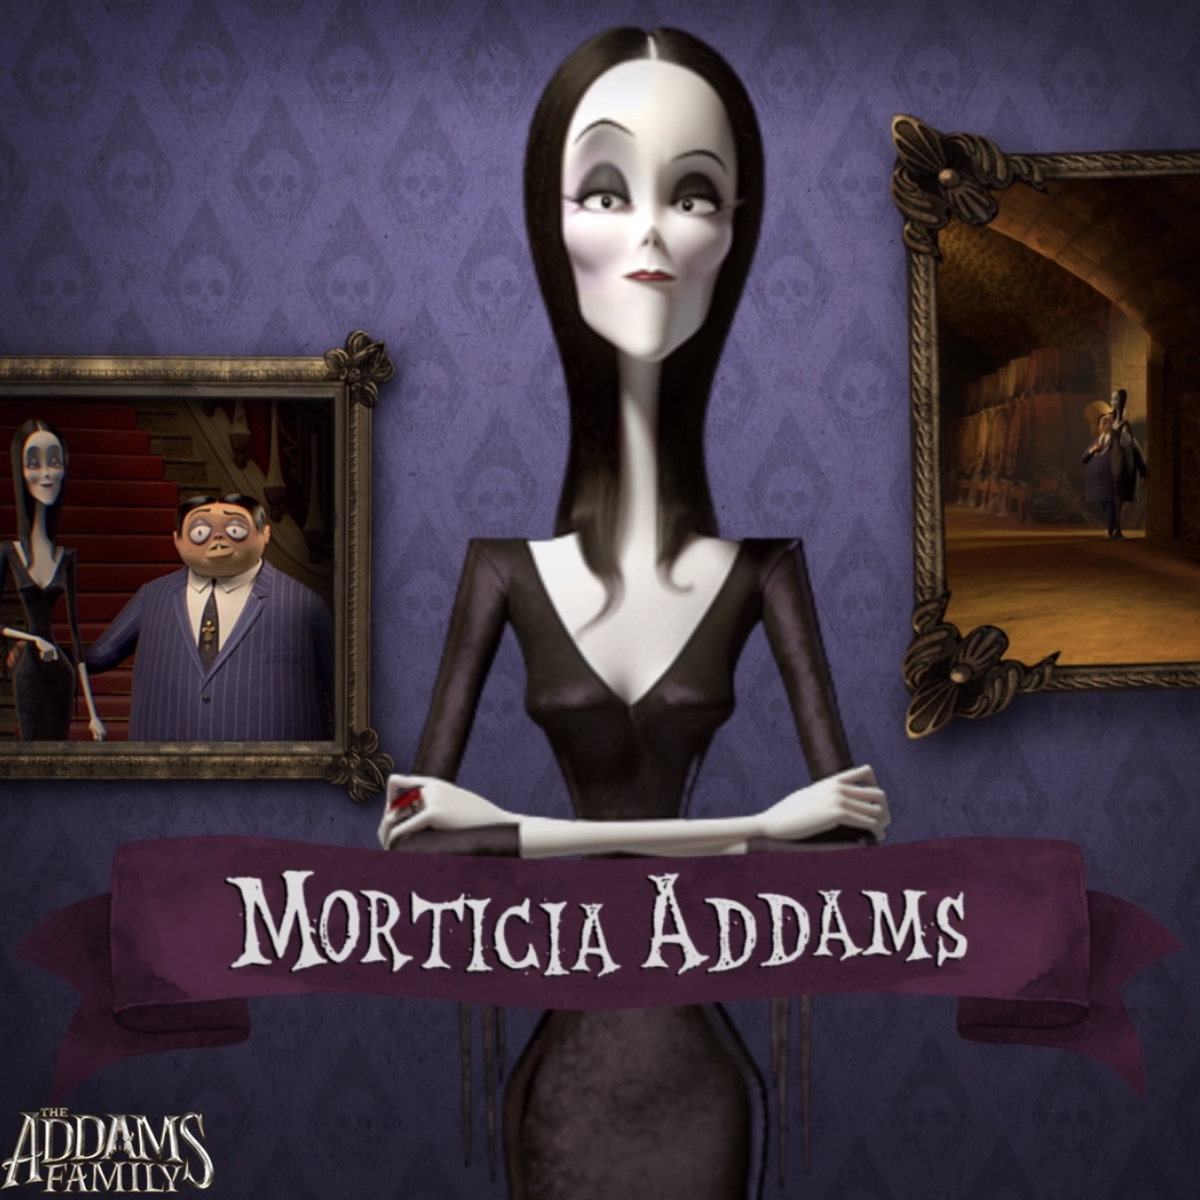 22-facts-about-morticia-addams-the-addams-family